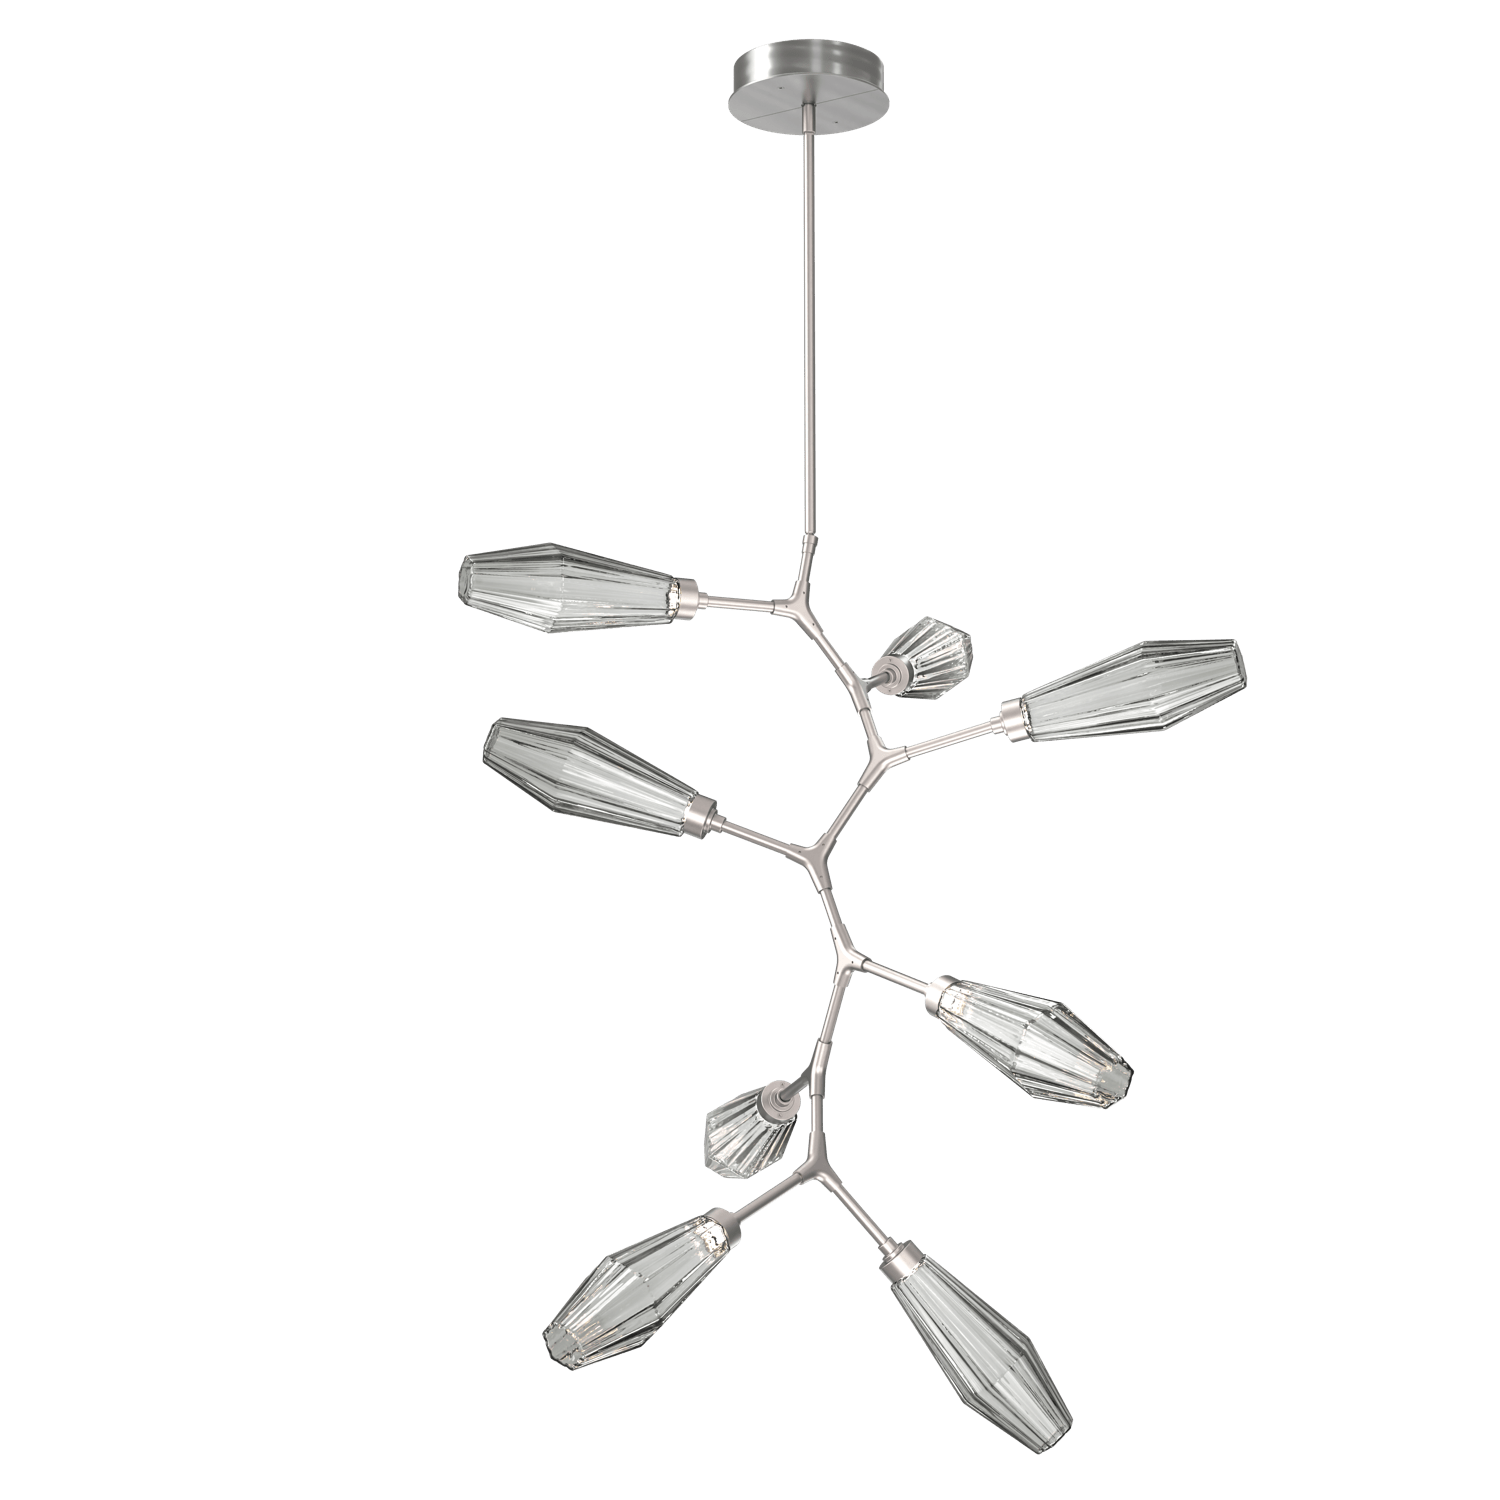 CHB0049-VB-SN-RS-Hammerton-Studio-Aalto-8-light-modern-vine-chandelier-with-satin-nickel-finish-and-optic-ribbed-smoke-glass-shades-and-LED-lamping